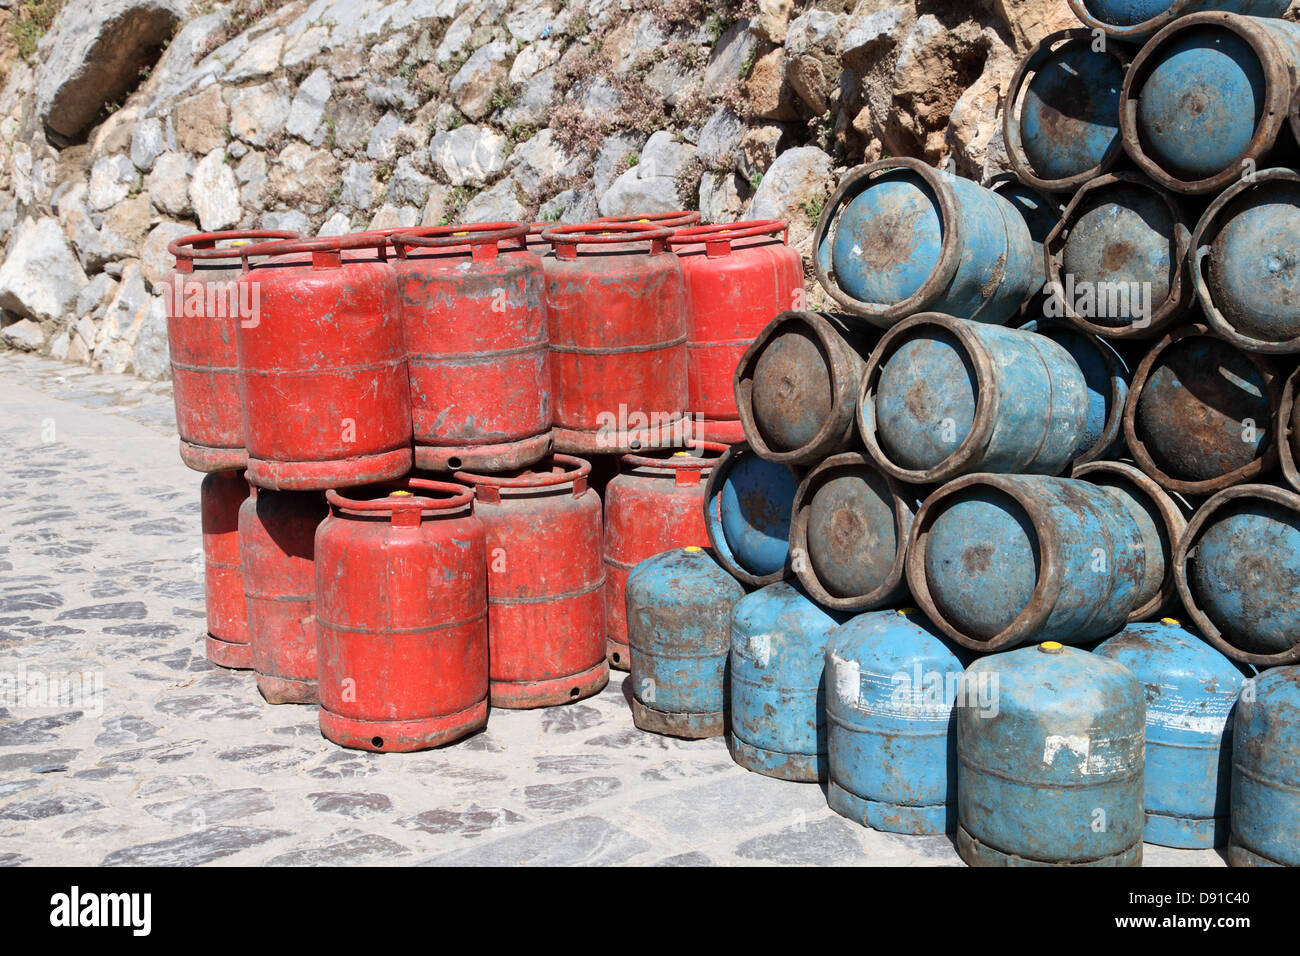 Red and blue propane gas bottles in Morocco Stock Photo